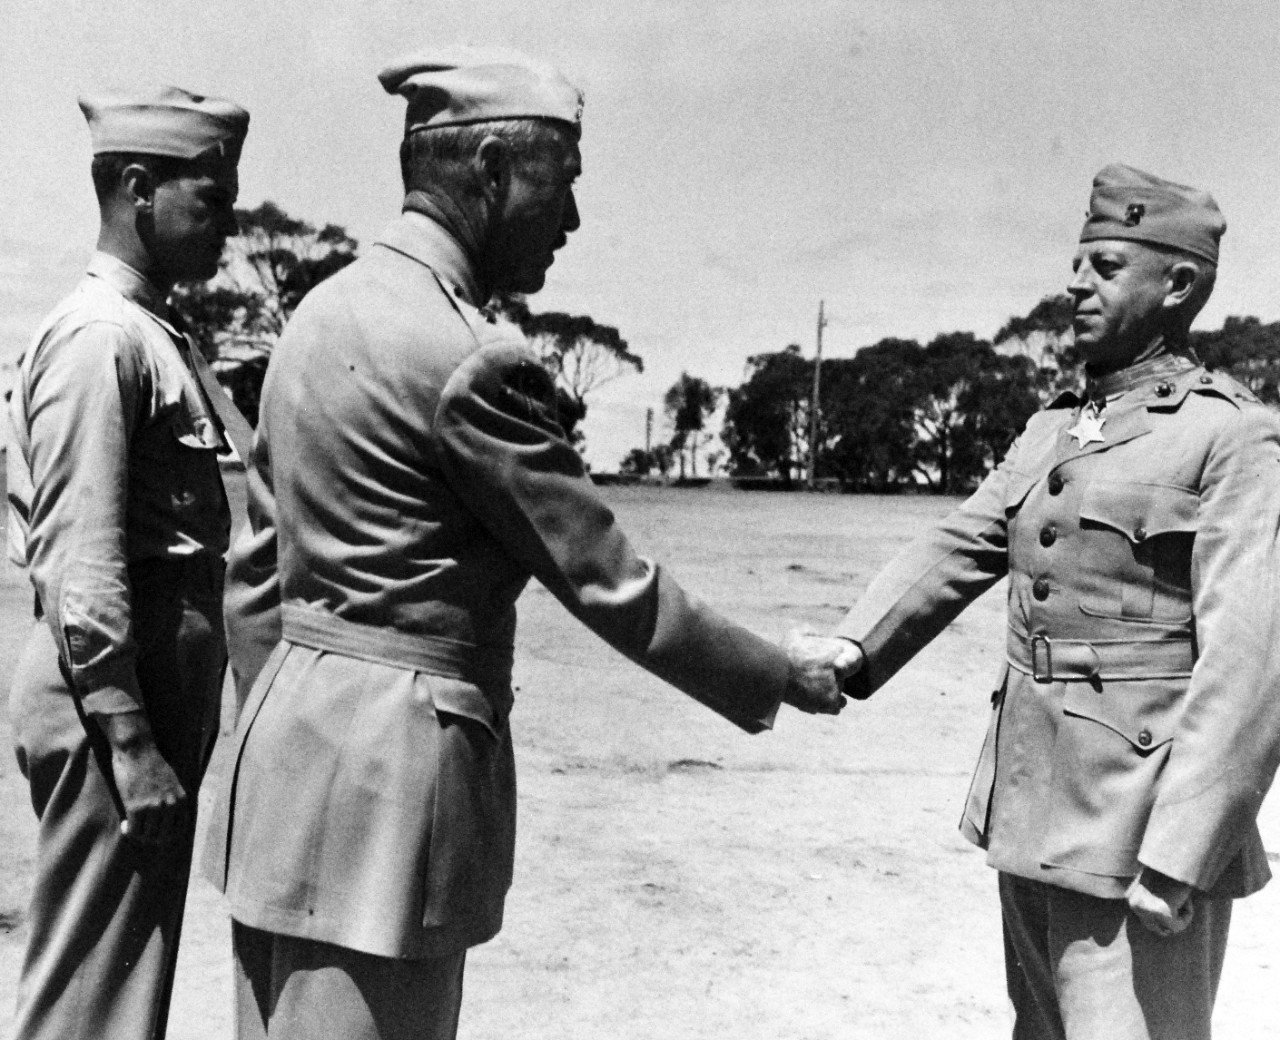 80-G-43481:  Present of Awards by Brigadier General William H. Rupertus, USMC, Assistant Division Commander of the 1st Marine Division.  Colonel Merritt Austin Edson, USMC, wearing the Congressional Medal of Honor, awarded for his extraordinary heroism in combat at Guadalcanal  13-14 September 1942.   .  He shown being congratulated by Brigadier General Rupertus.  On the left is Lieutenant Guy Tarrant.    Note, during the early landing stages, Colonel Edson also received two Navy Crosses for his “extraordinary heroism”.    Official U.S. Navy Photograph, now in the collections of the National Archives.   Photograph released October 28, 1943.  (2015/08/18).